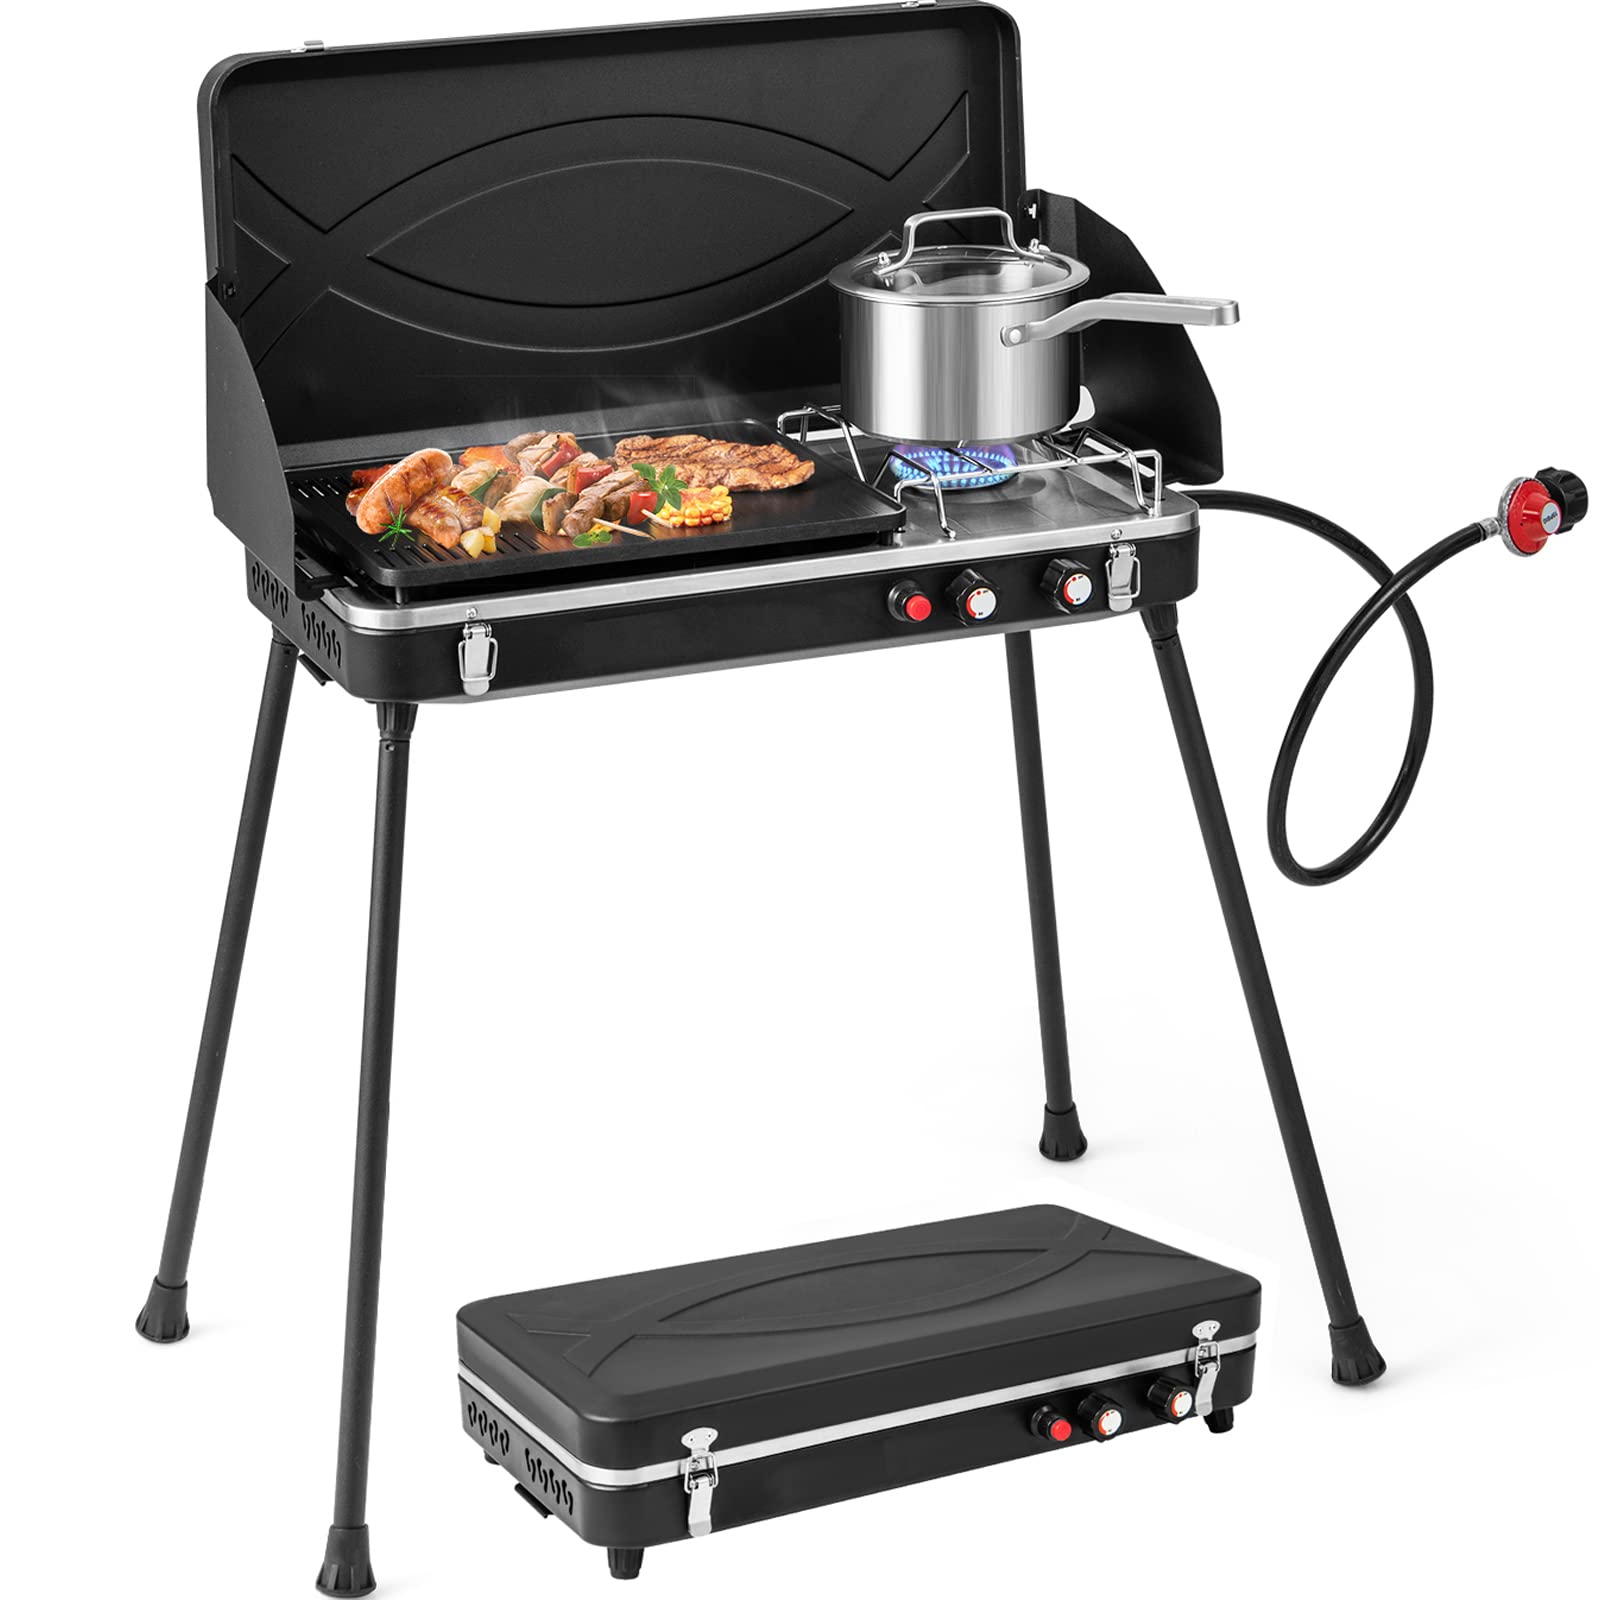  Giantex Charcoal Grill Hibachi Grill, Portable Cast Iron Grill  with Double-sided Grilling Net, Air Regulating Door, Fire Gate, BBQ Grill  Perfect for Outdoor Picnic Camping Patio Backyard Cooking : Patio, Lawn